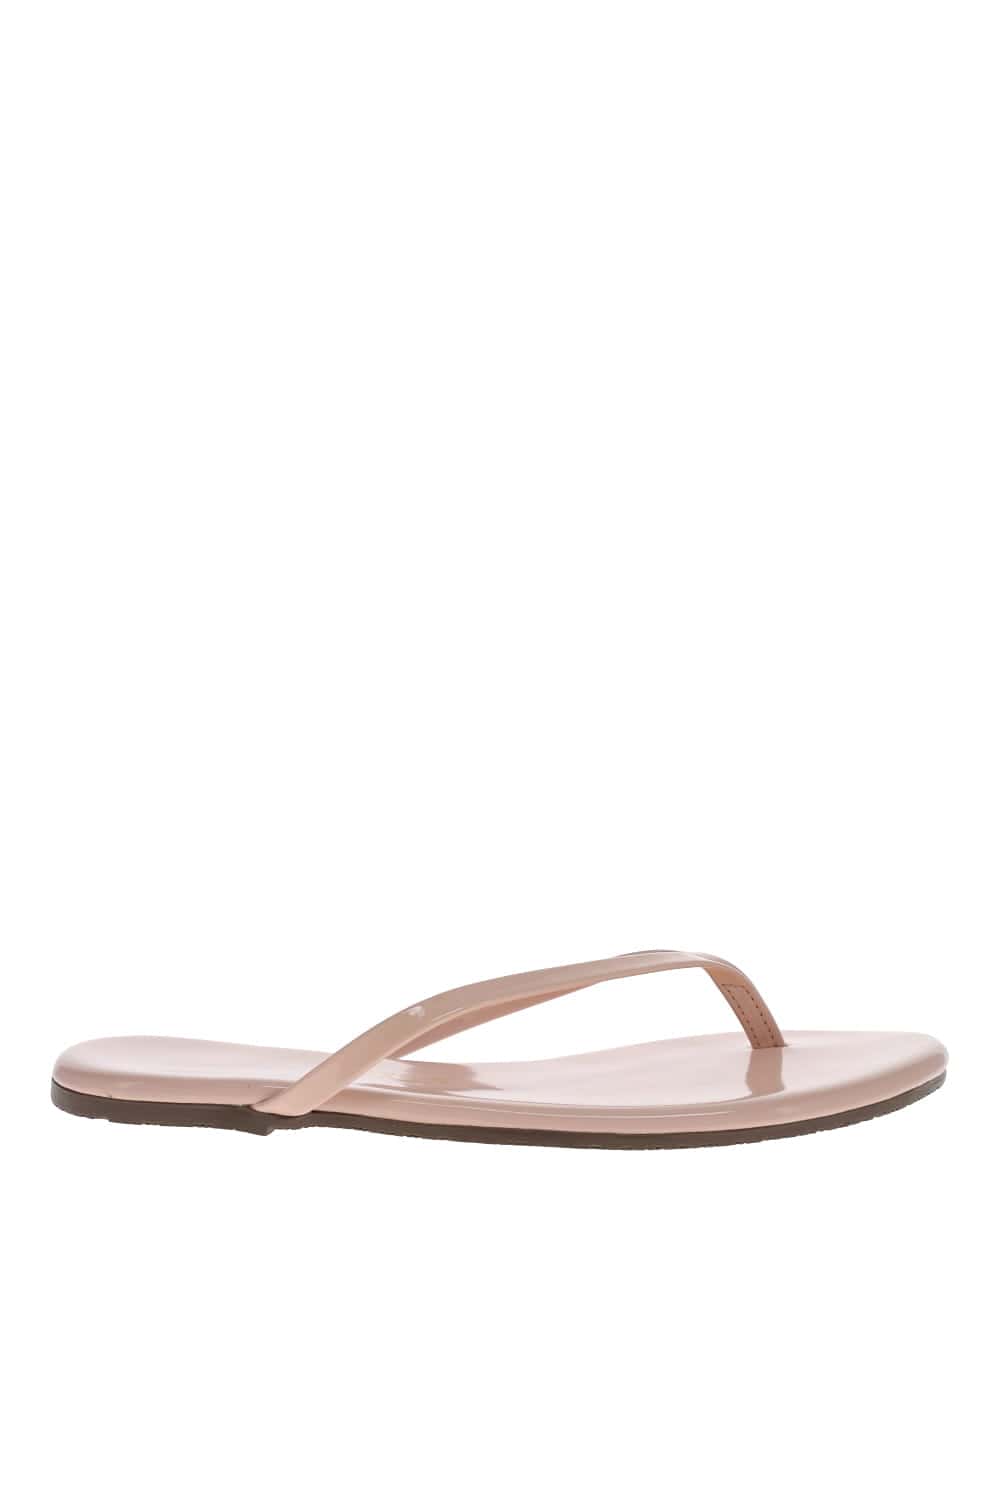 Glosses Whipped Cream Leather Sandal